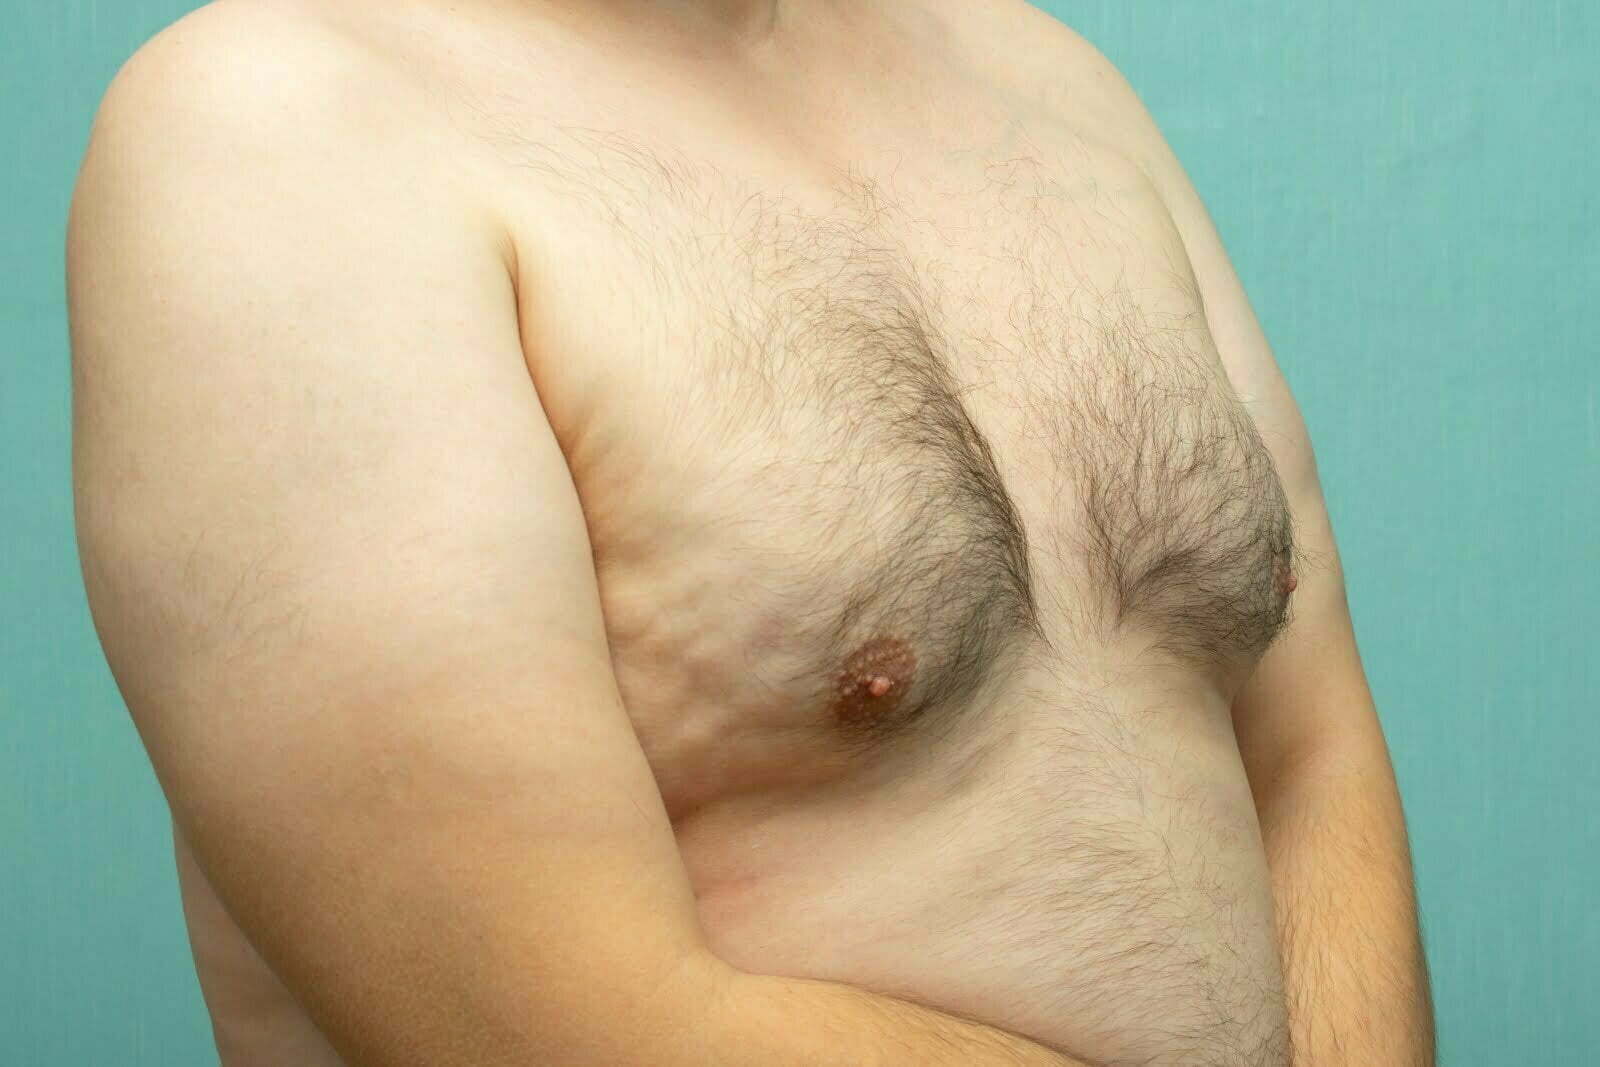 How To Tell If You Have Gyno: Understanding the Symptoms and Causes of  Gynecomastia - Salameh Plastic Surgery